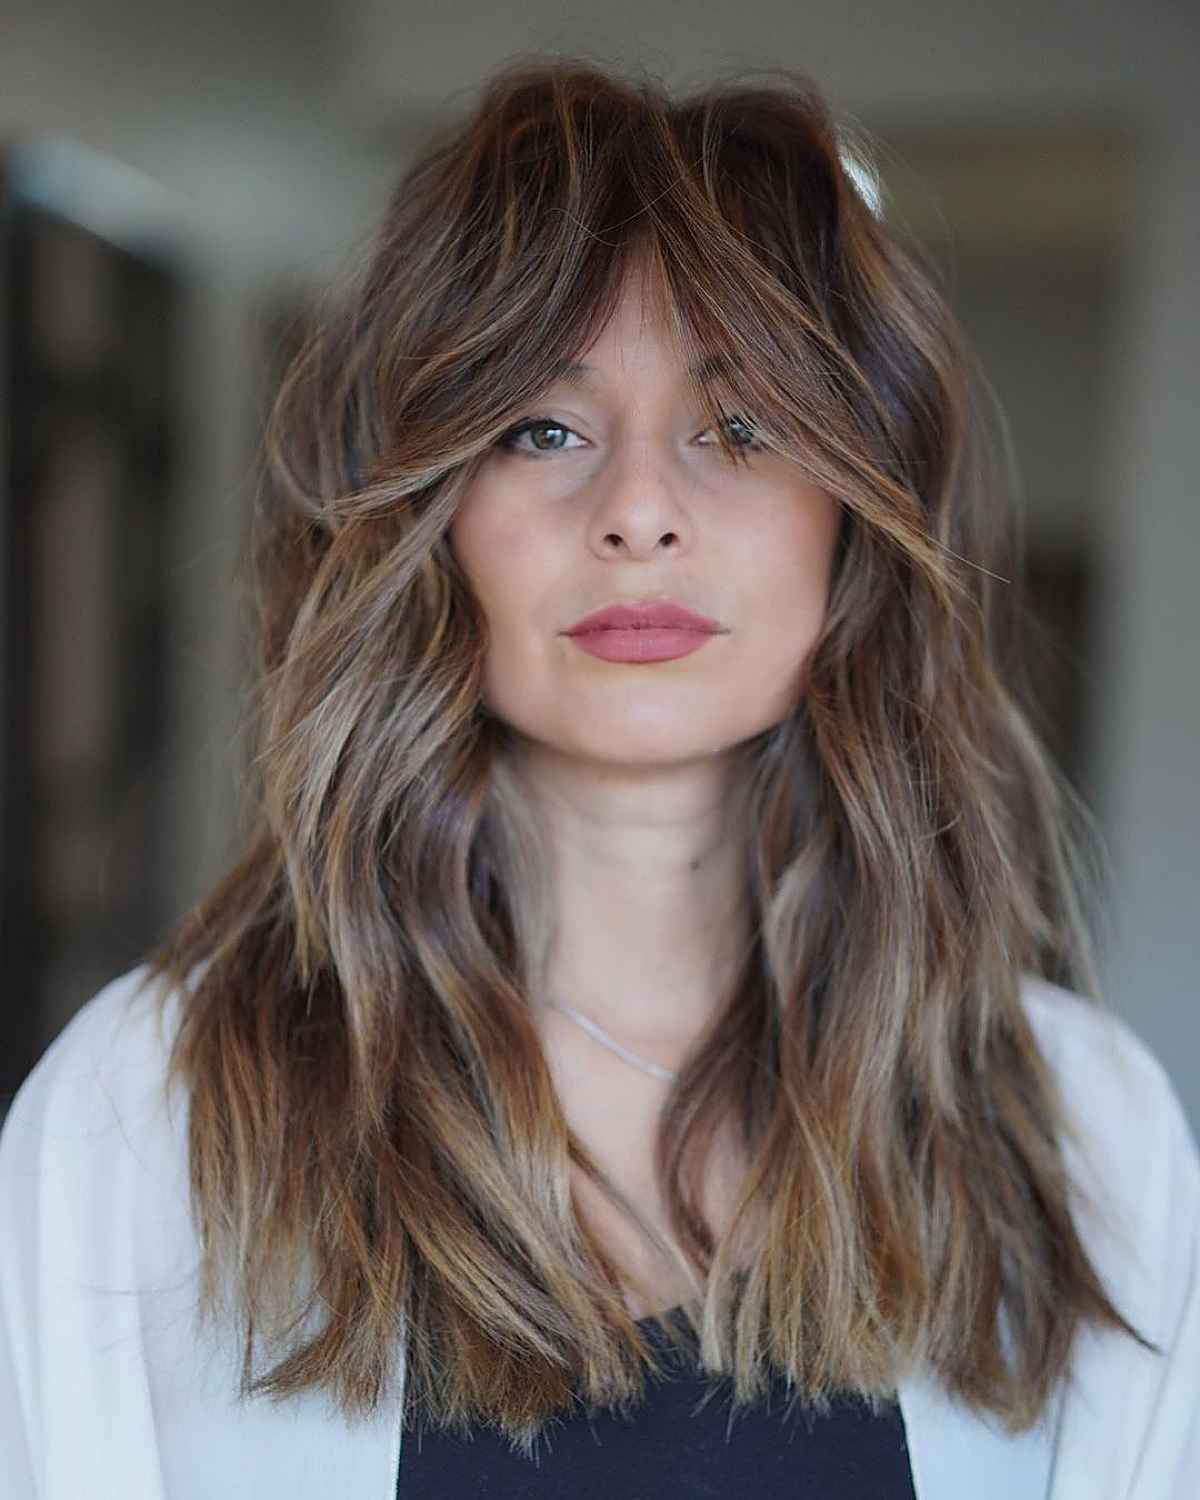 33 Stunning Light Brown Hair with Blonde Highlights to Copy